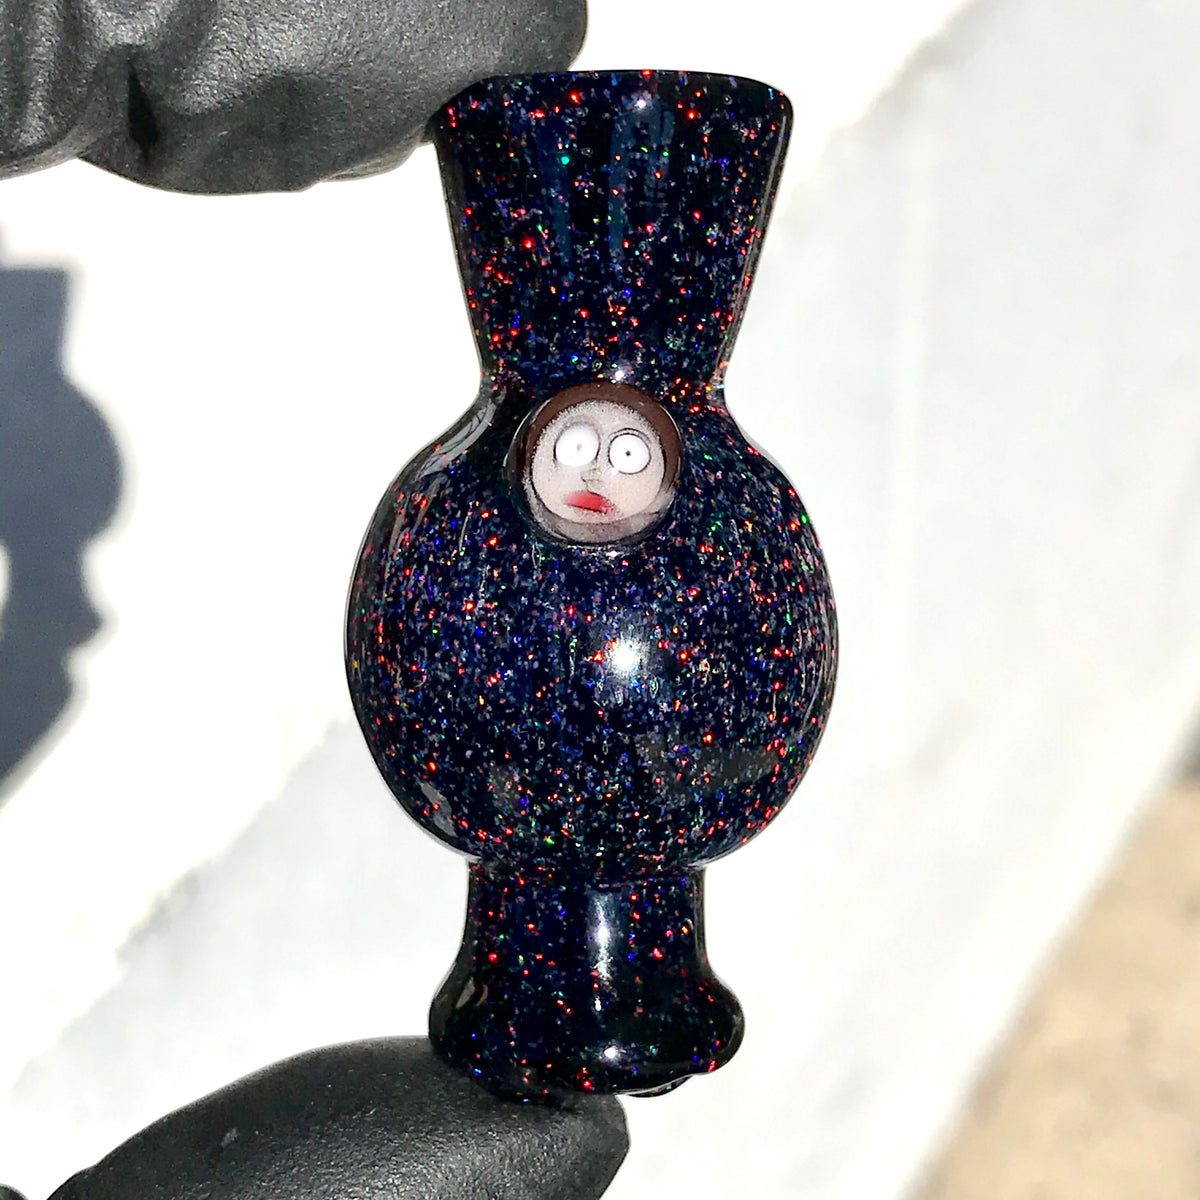 Hoyer Glass Spinner Cap with Milli Image and Matching Milli Terp Pearl (Crushed Opal) show variant 